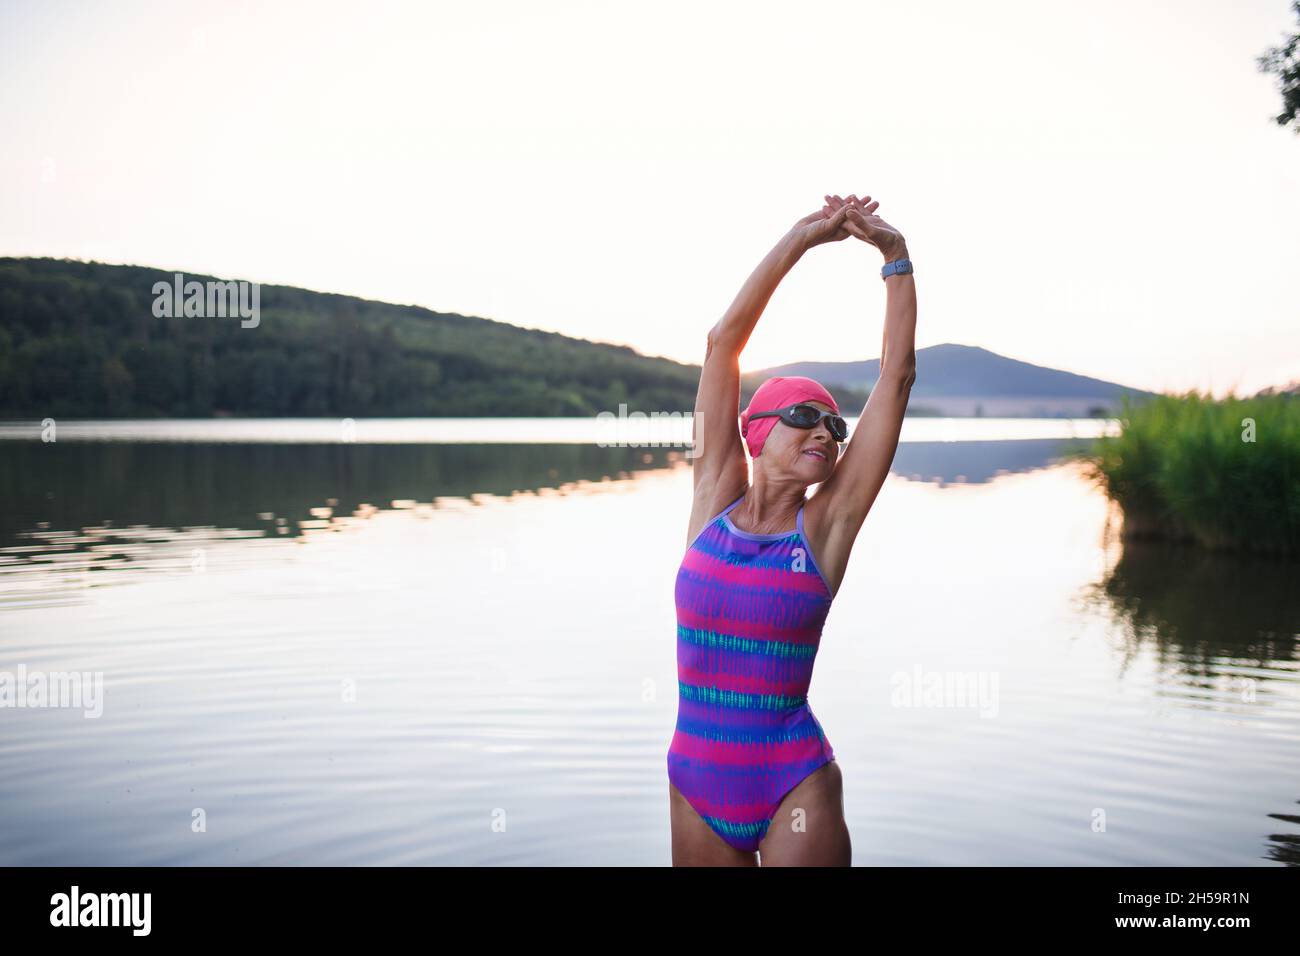 Portrait of active senior woman swimmer standing and stretching outdoors by lake. Stock Photo